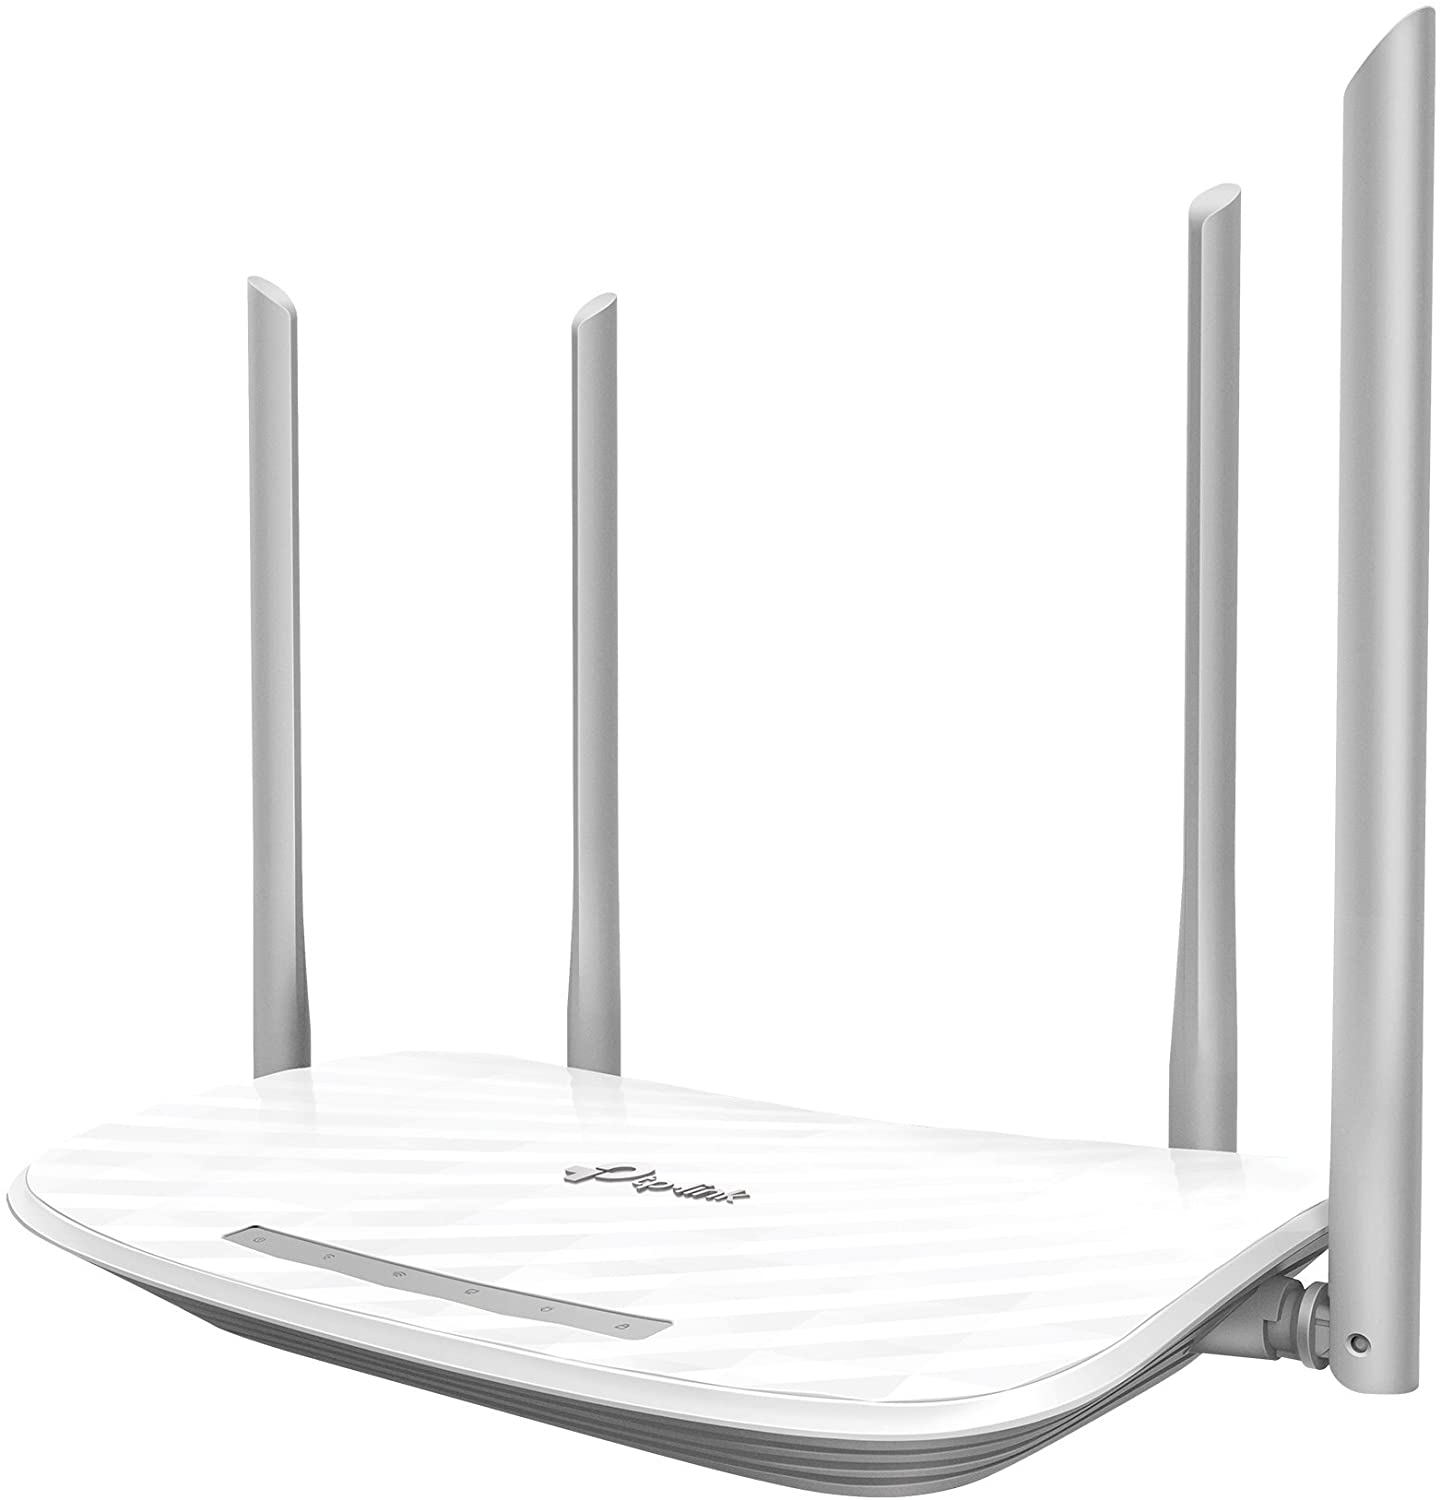 TP-Link (Archer C50 V3), AC1200 (867+300) Wireless Dual Band 10/100 Cable Router, 4-Port